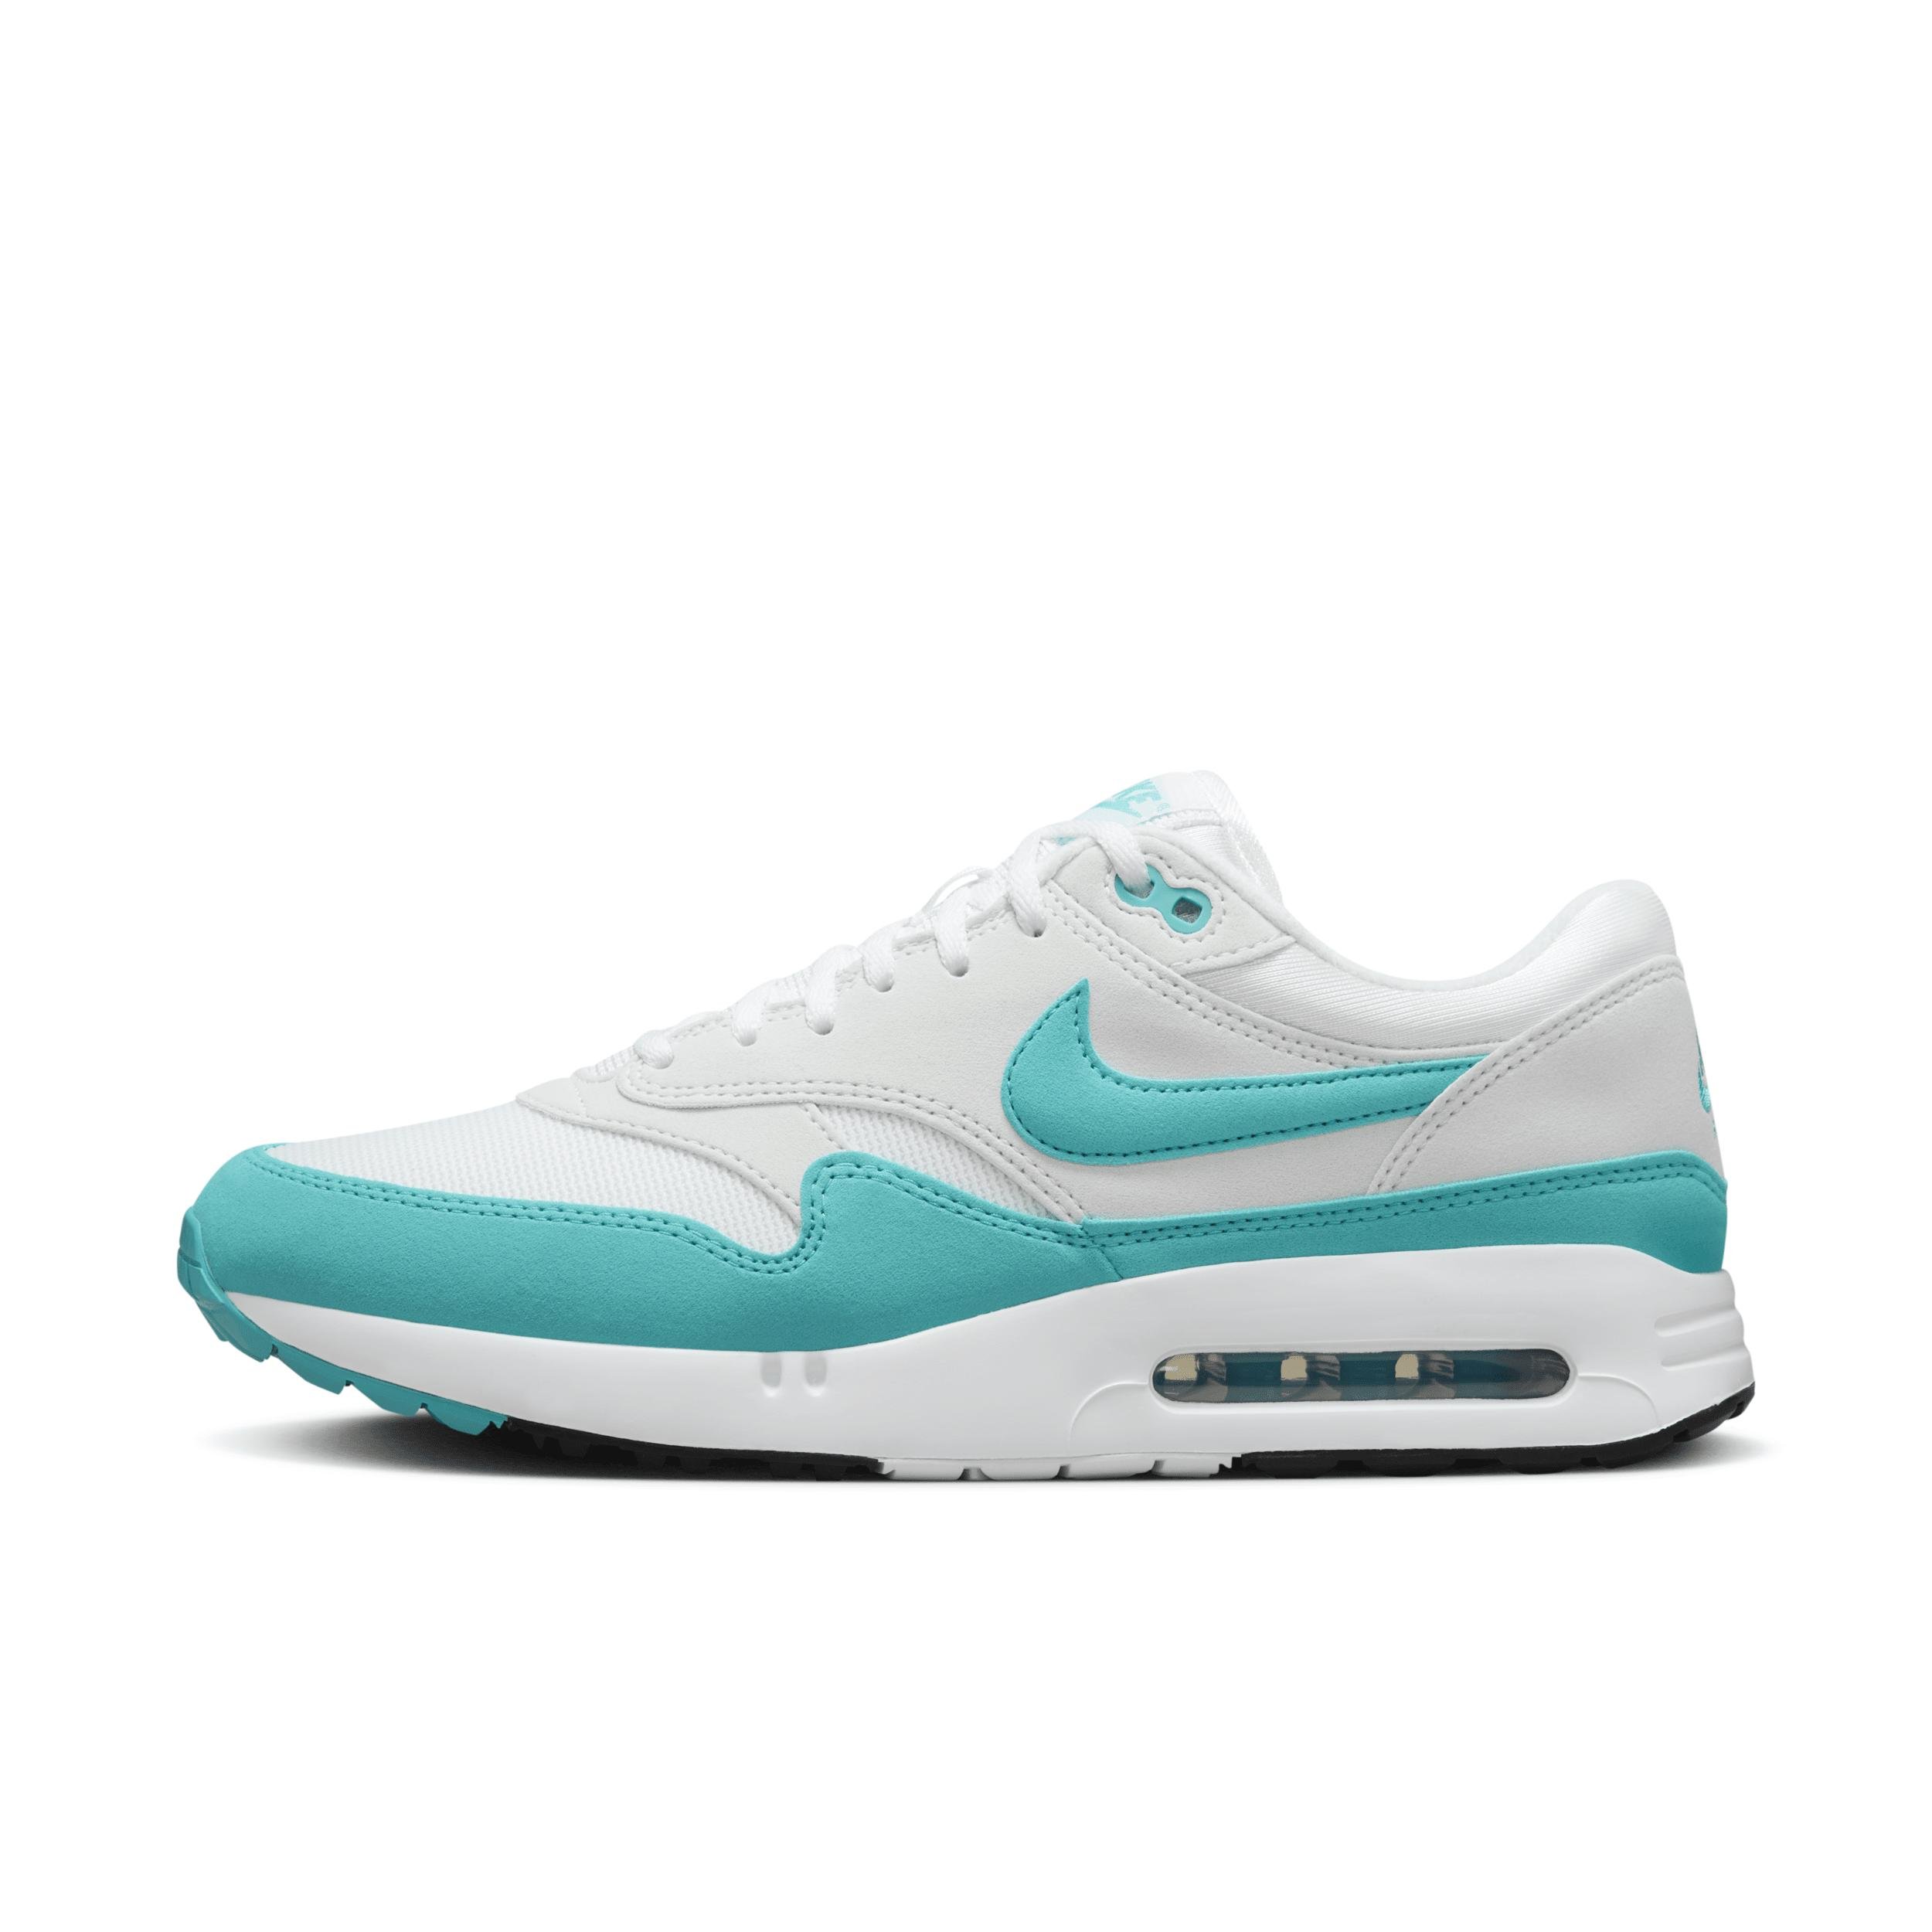 Nike Men's Air Max 1 '86 OG G Golf Shoes by NIKE